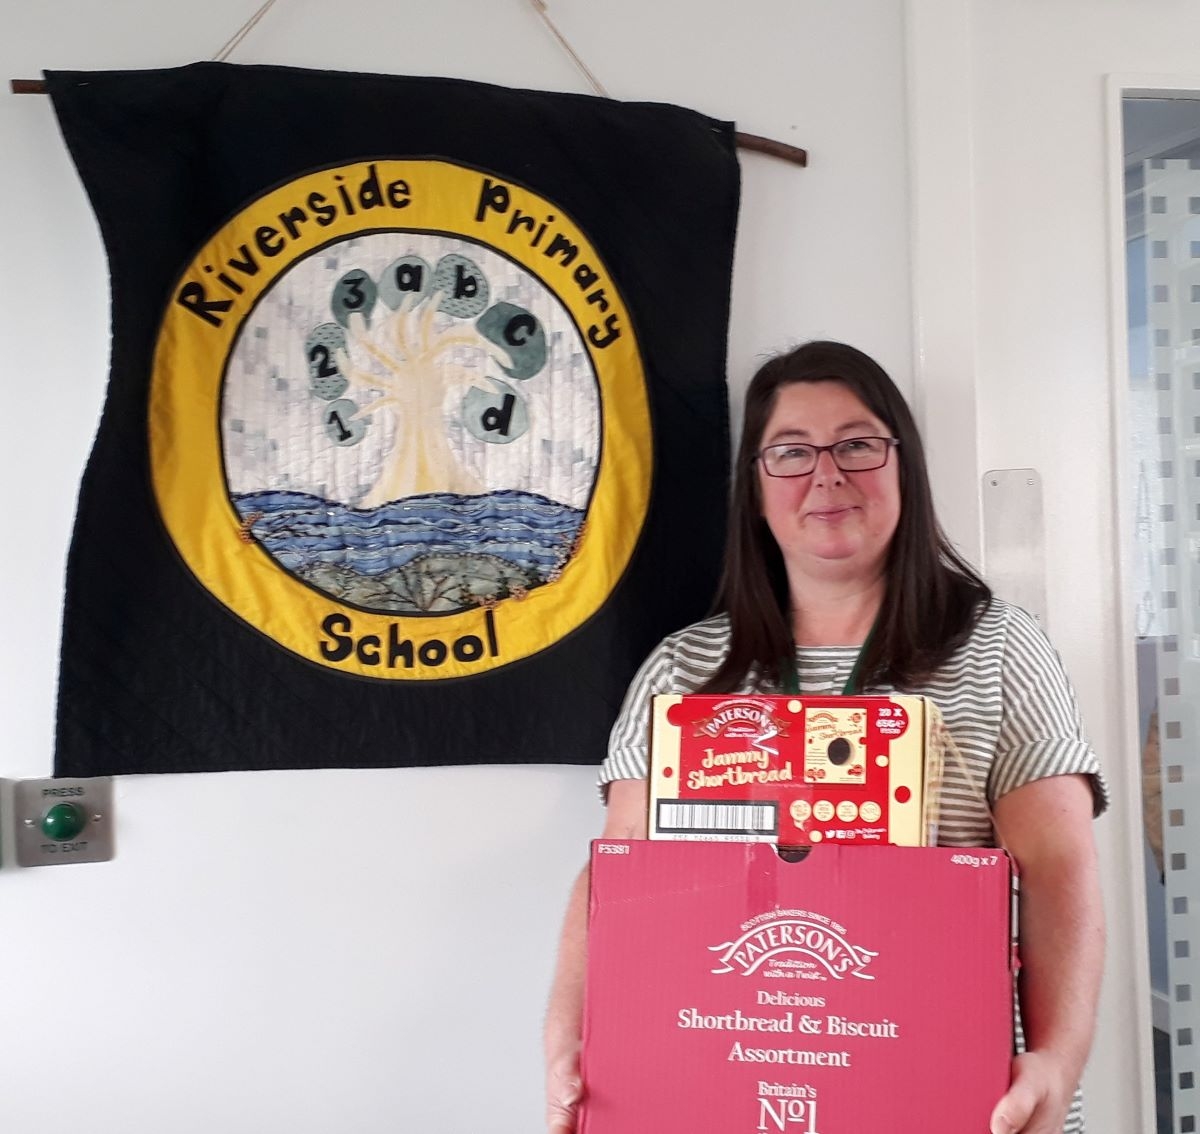 COVID-19 - Donation of Biscuits - Paterson's biscuits donated to Riverside Primary School